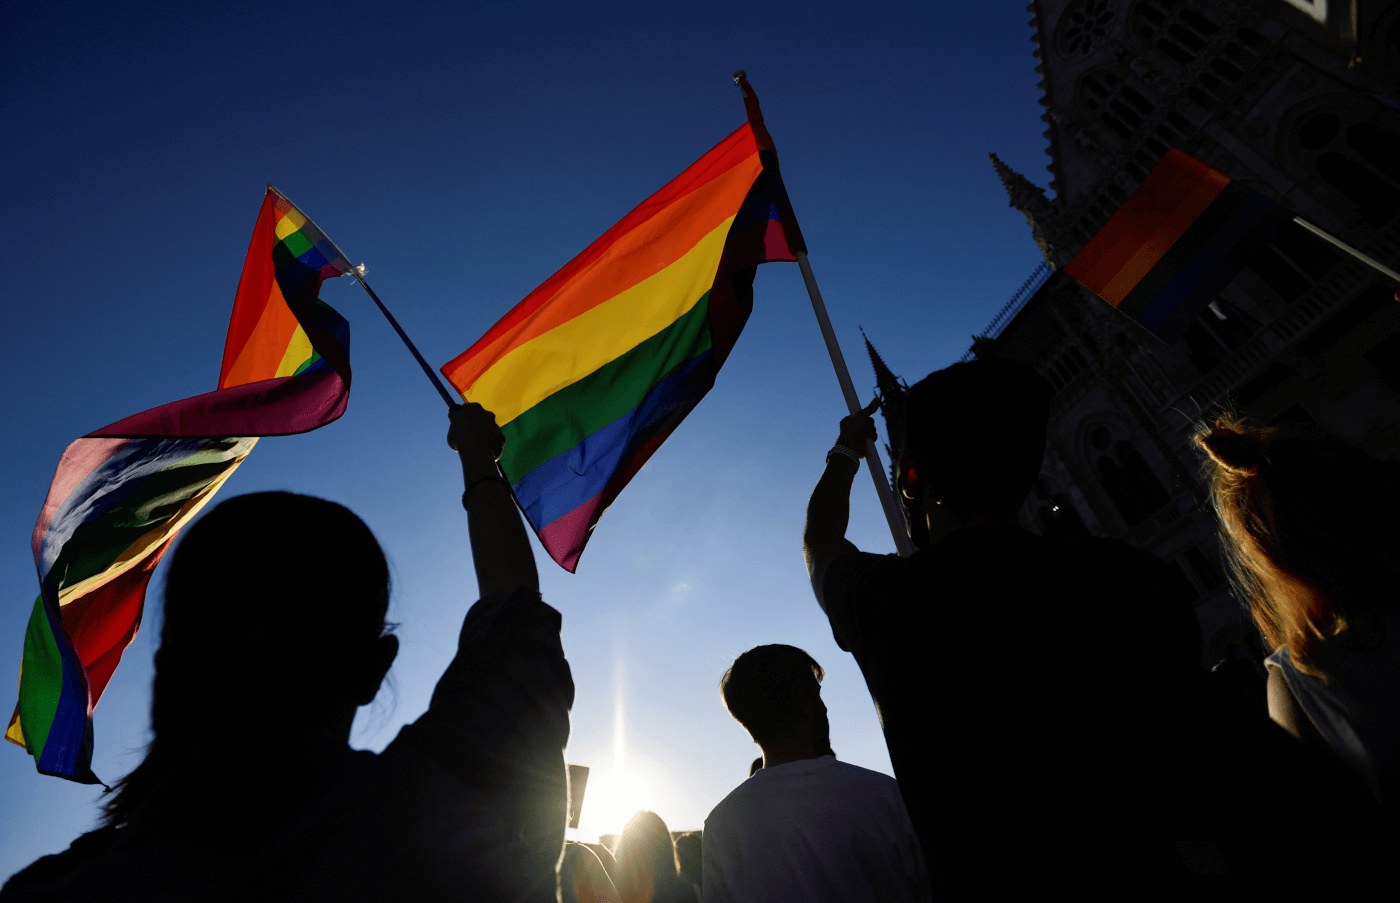 European Union launches legal action against Hungary and Poland over LGBTQ rights abuses